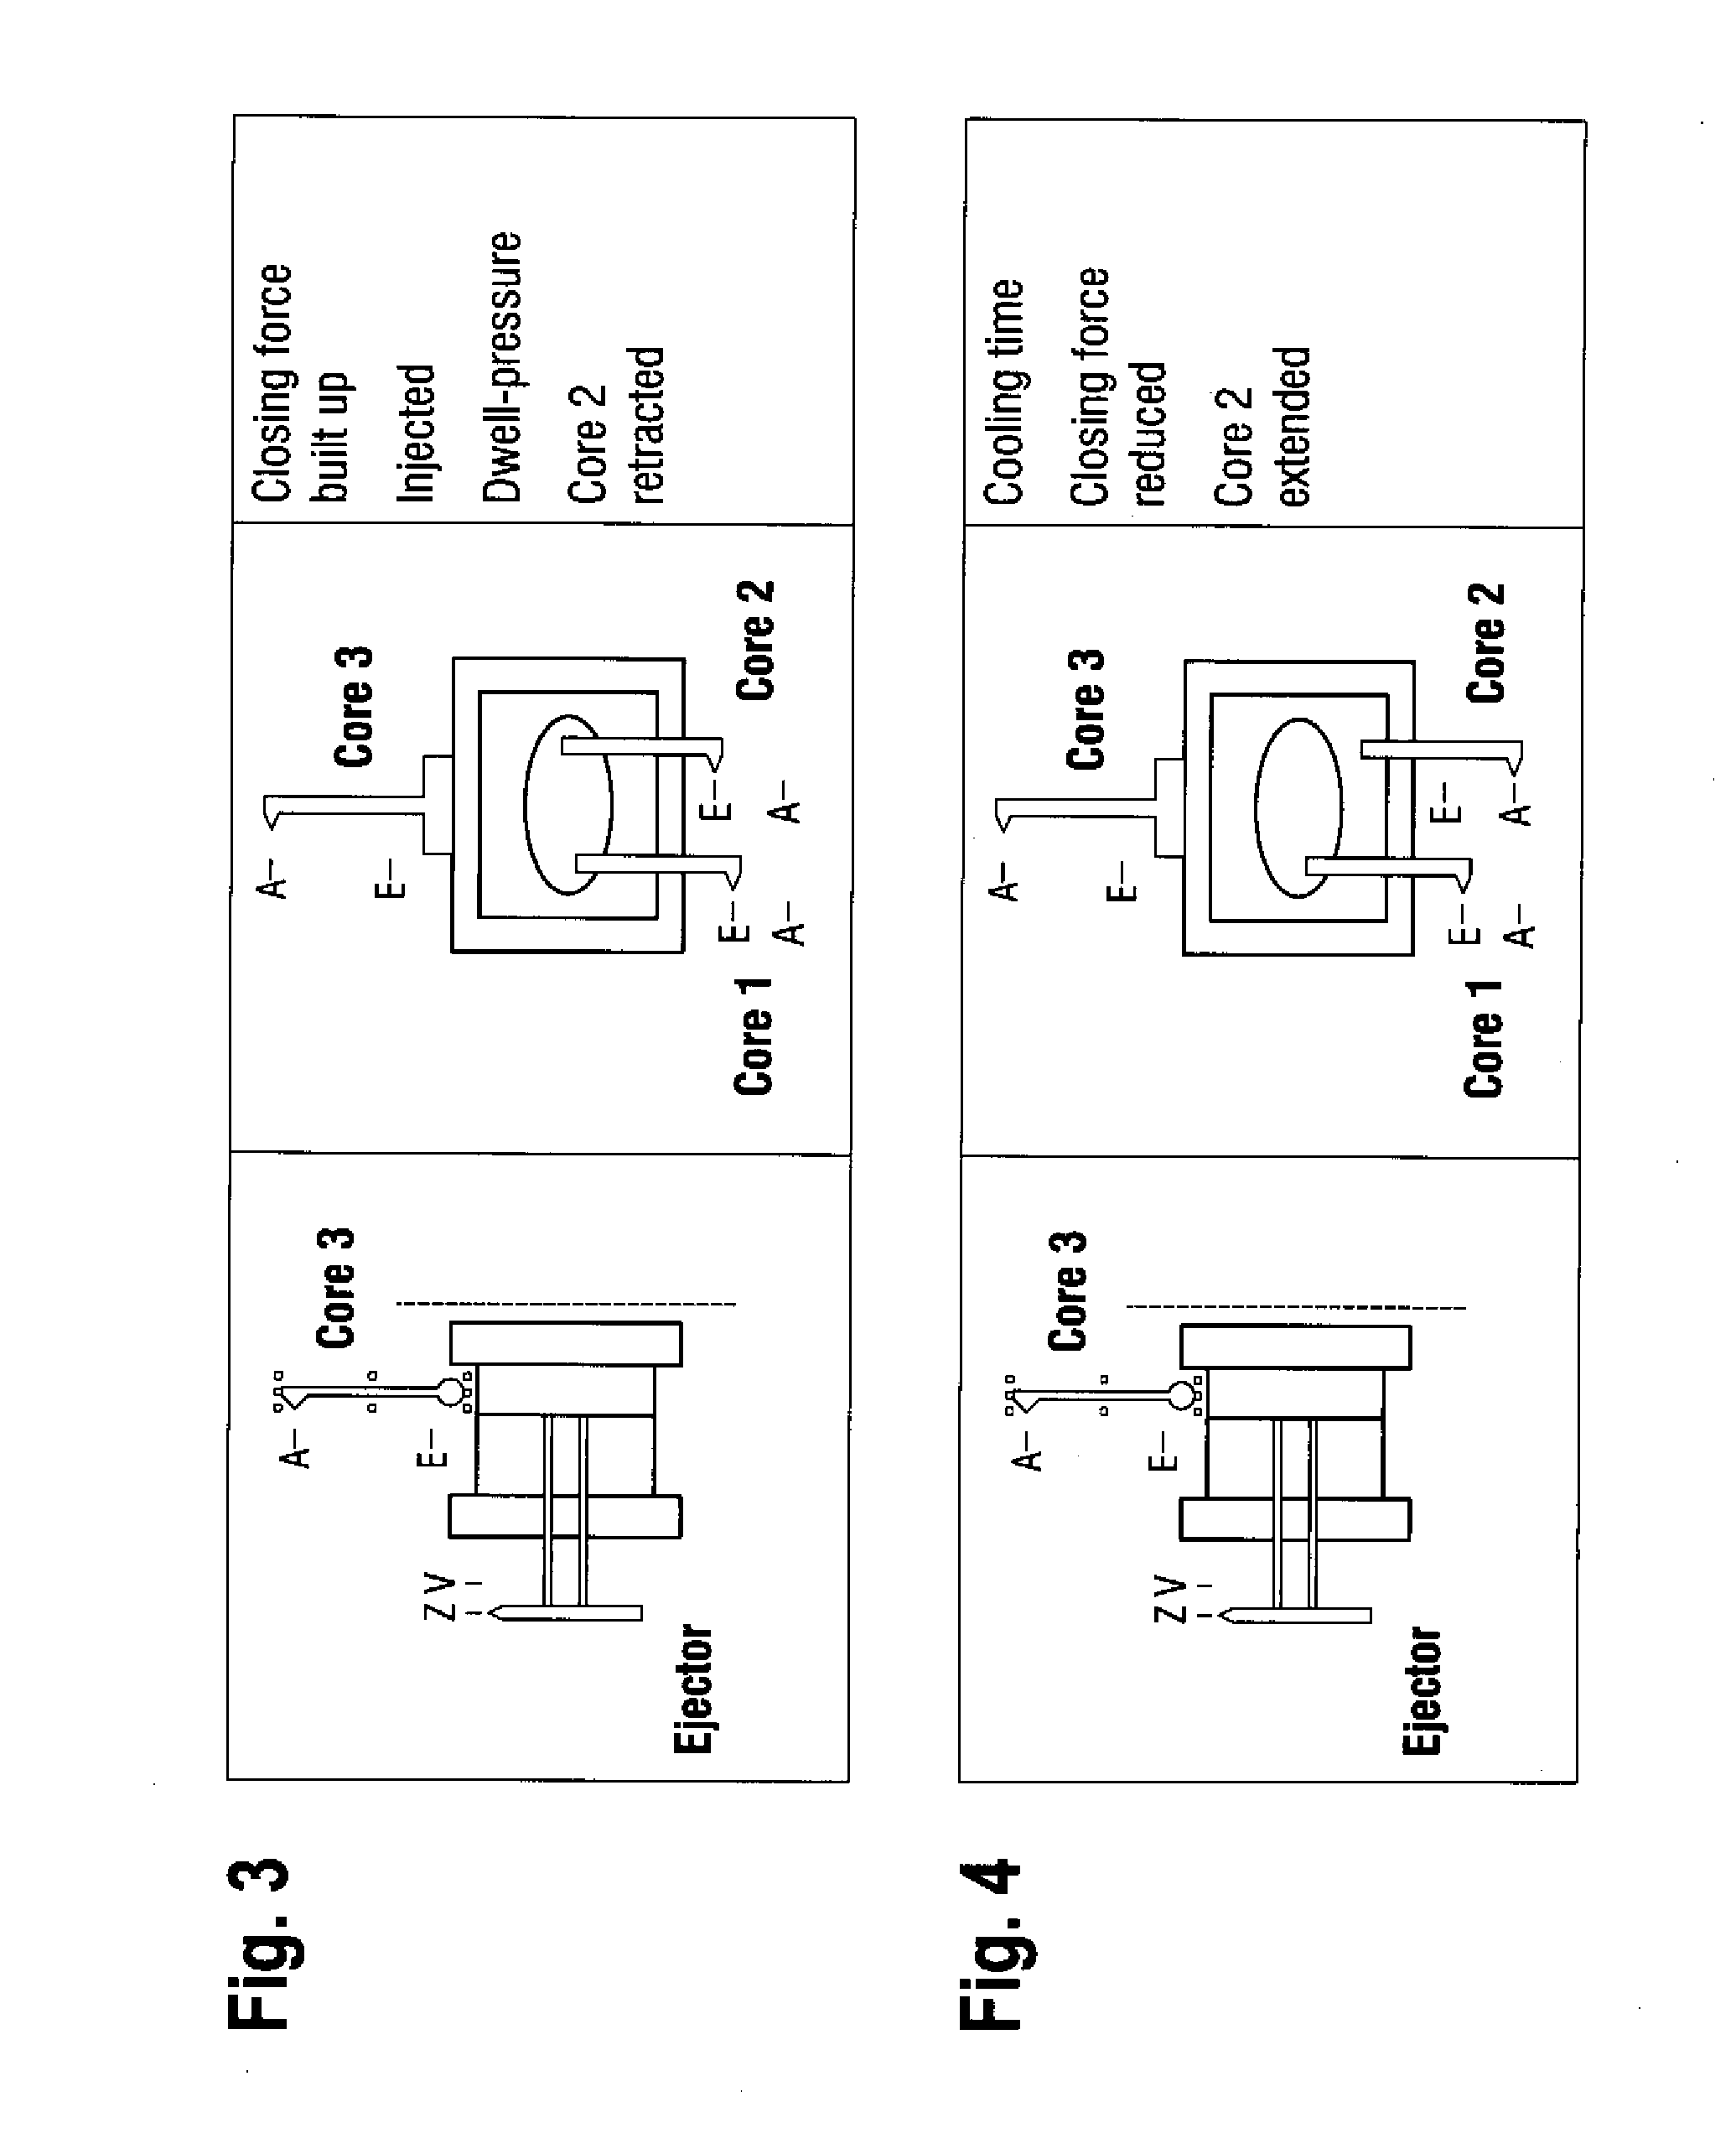 Method for sequential programming of an injection molding cycle of an injection molding machine